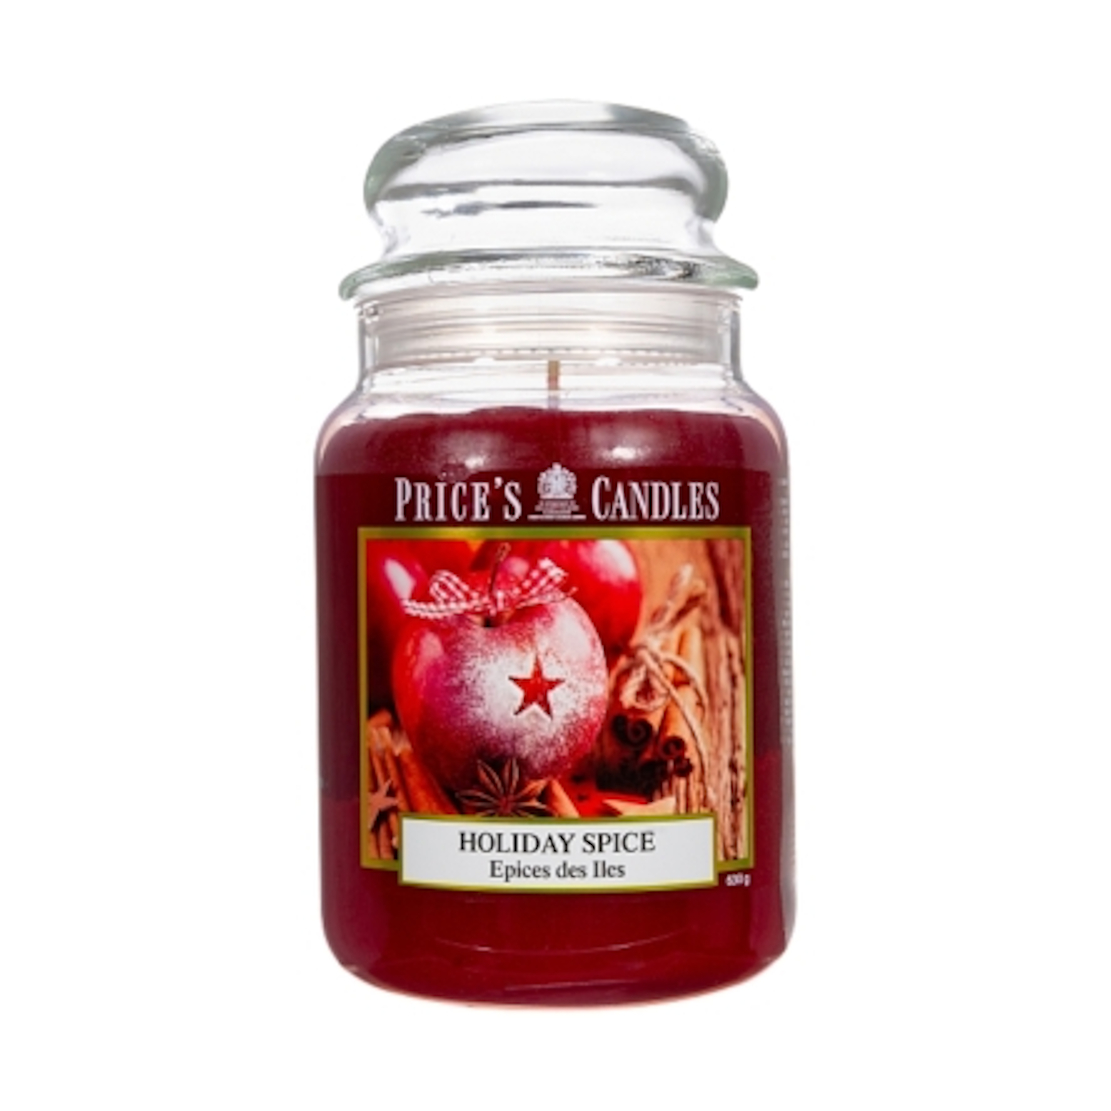 Prices Candles Holiday Spice Large Jar